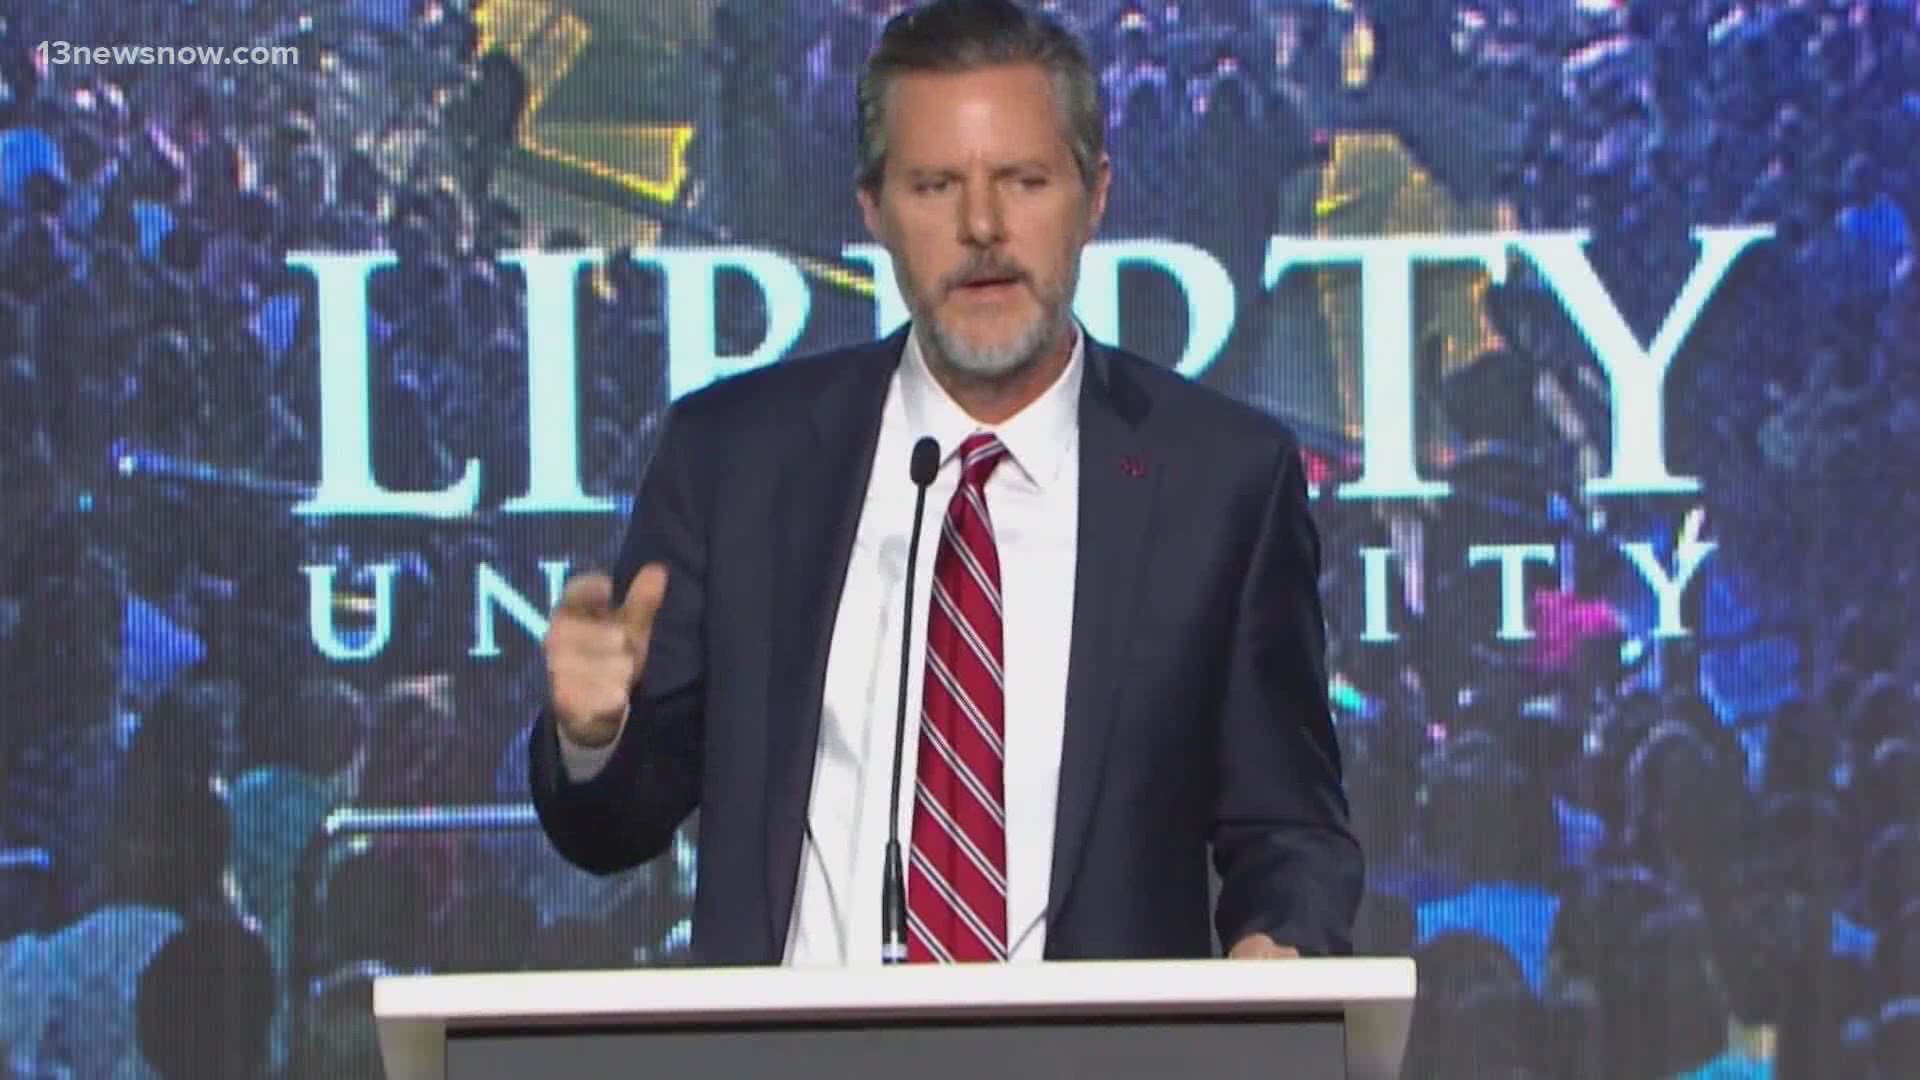 A senior official at Liberty University said Jerry Falwell Jr. was leaving his leadership post. Falwell reportedly says that's not true.